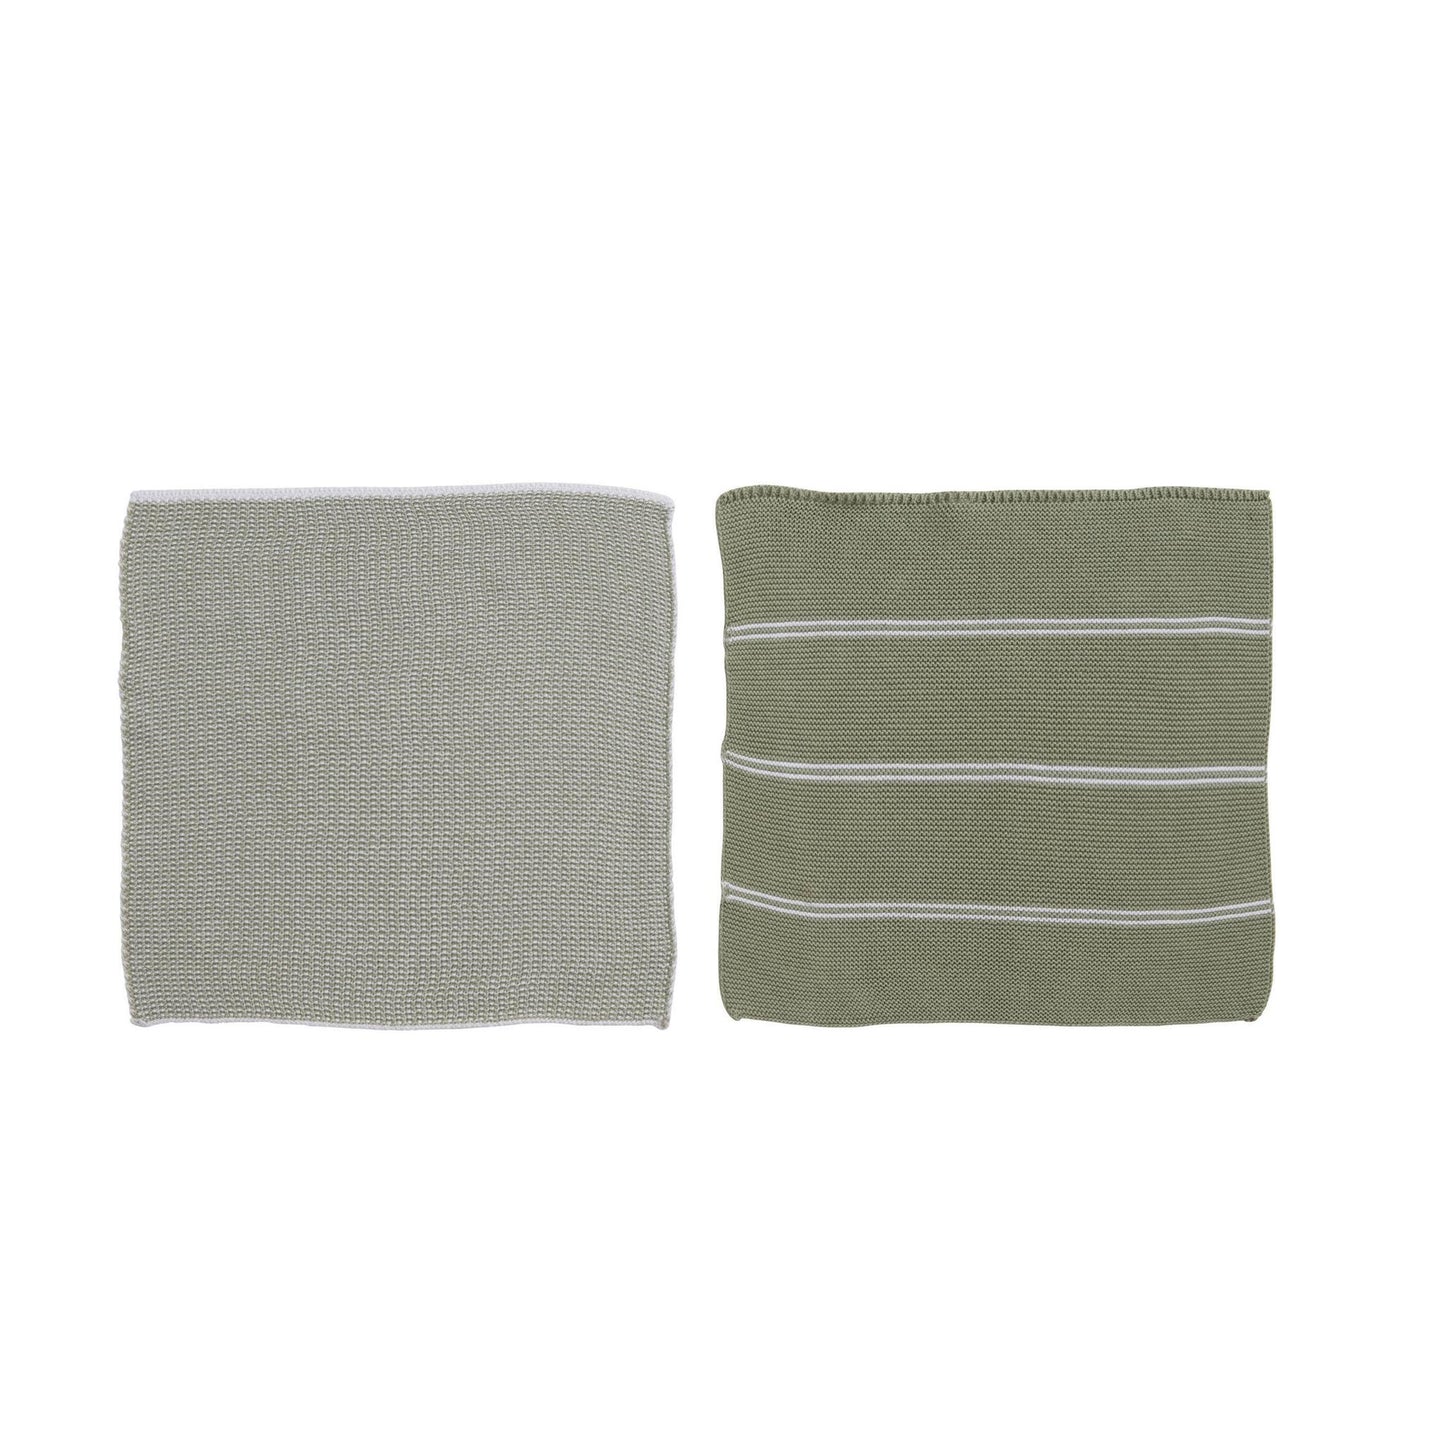 Set of Two Square Cotton Knit Dish Cloths